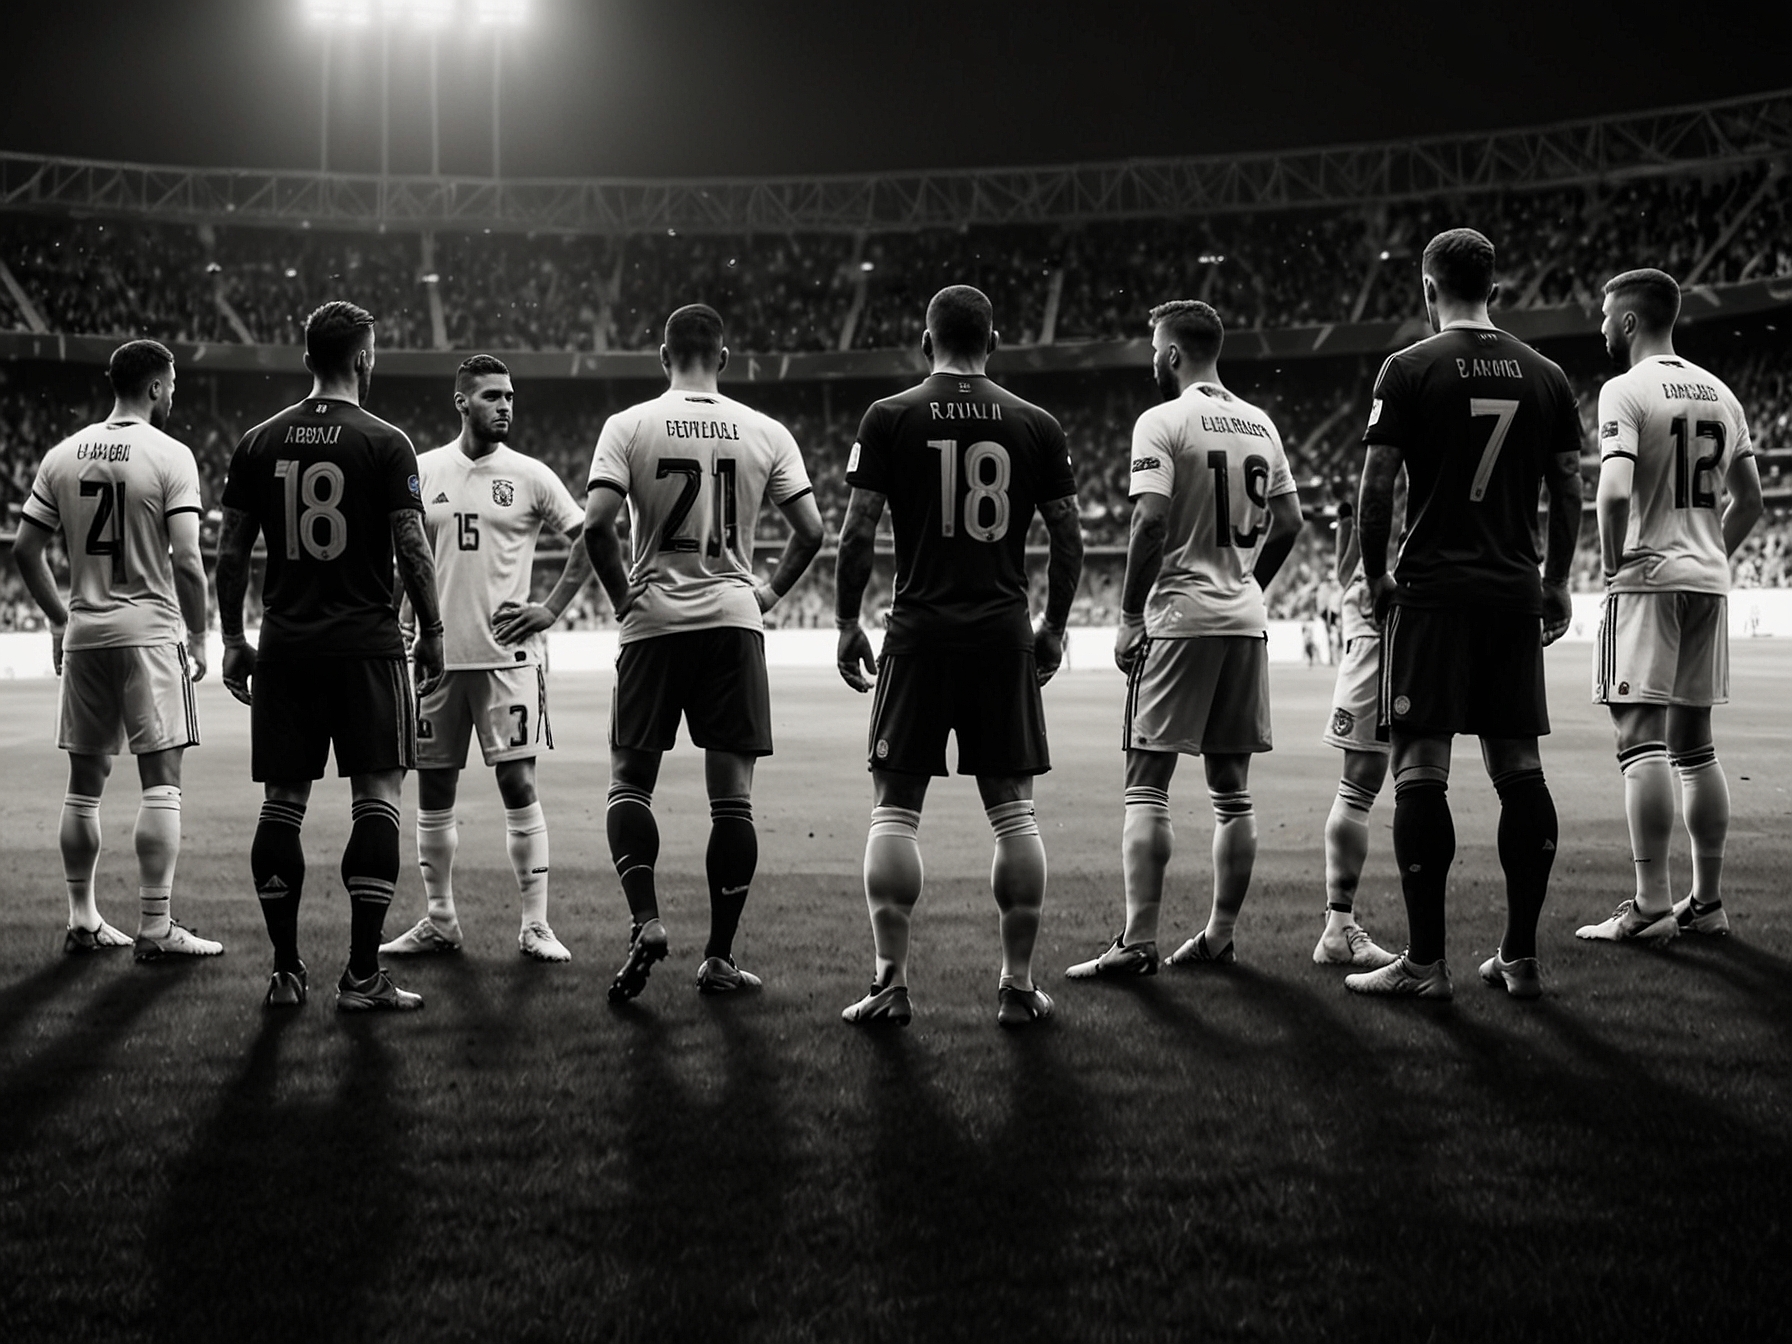 Players from both teams line up on the pitch before kick-off, with key players like Sergio Ramos and Leonardo Bonucci ready for action, underlining the intense rivalry and history between Spain and Italy.